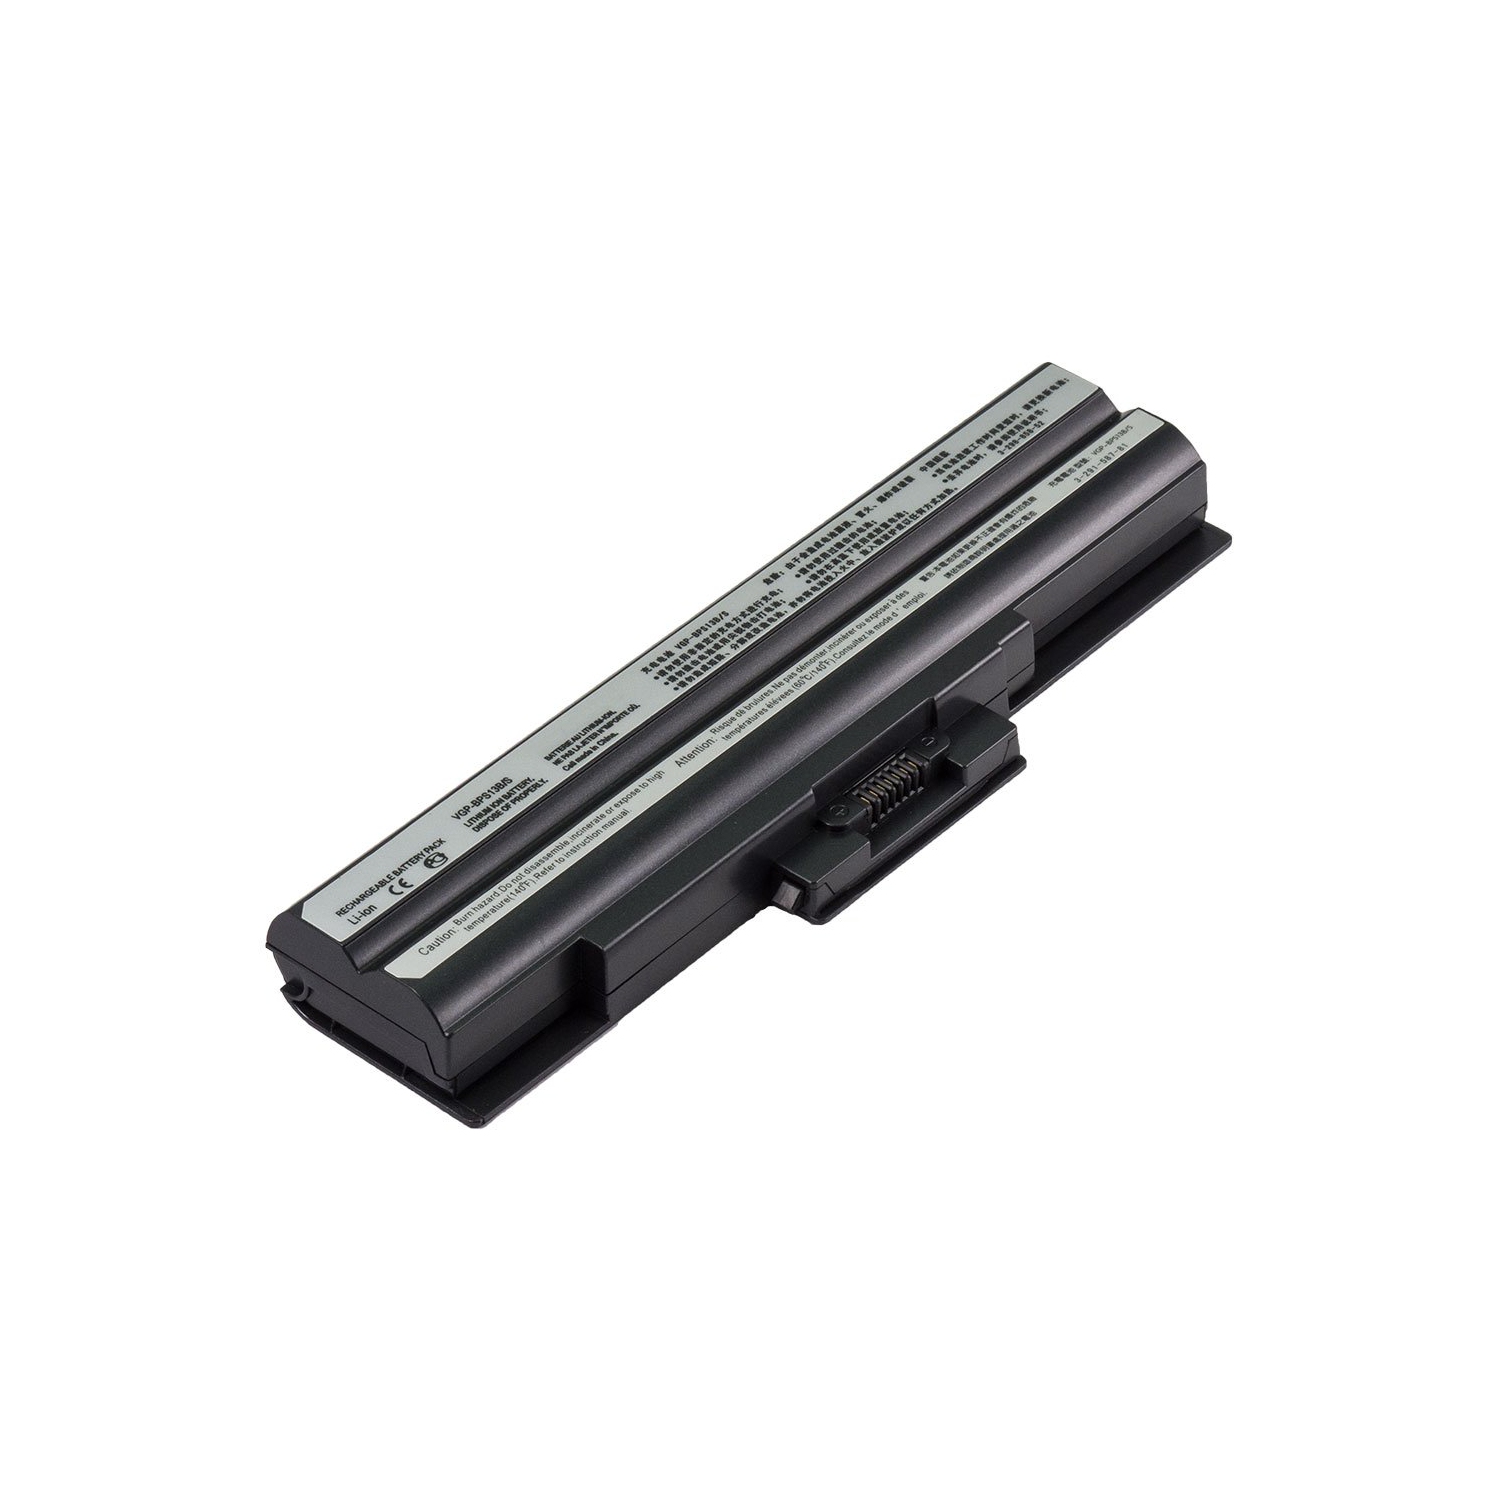 Laptop Battery Replacement for Sony VAIO VGN-AW21VY/Q, VGP-BPL13, VGP-BPS13/Q, VGP-BPS13A/B, VGP-BPS13A/S, VGP-BPS13A